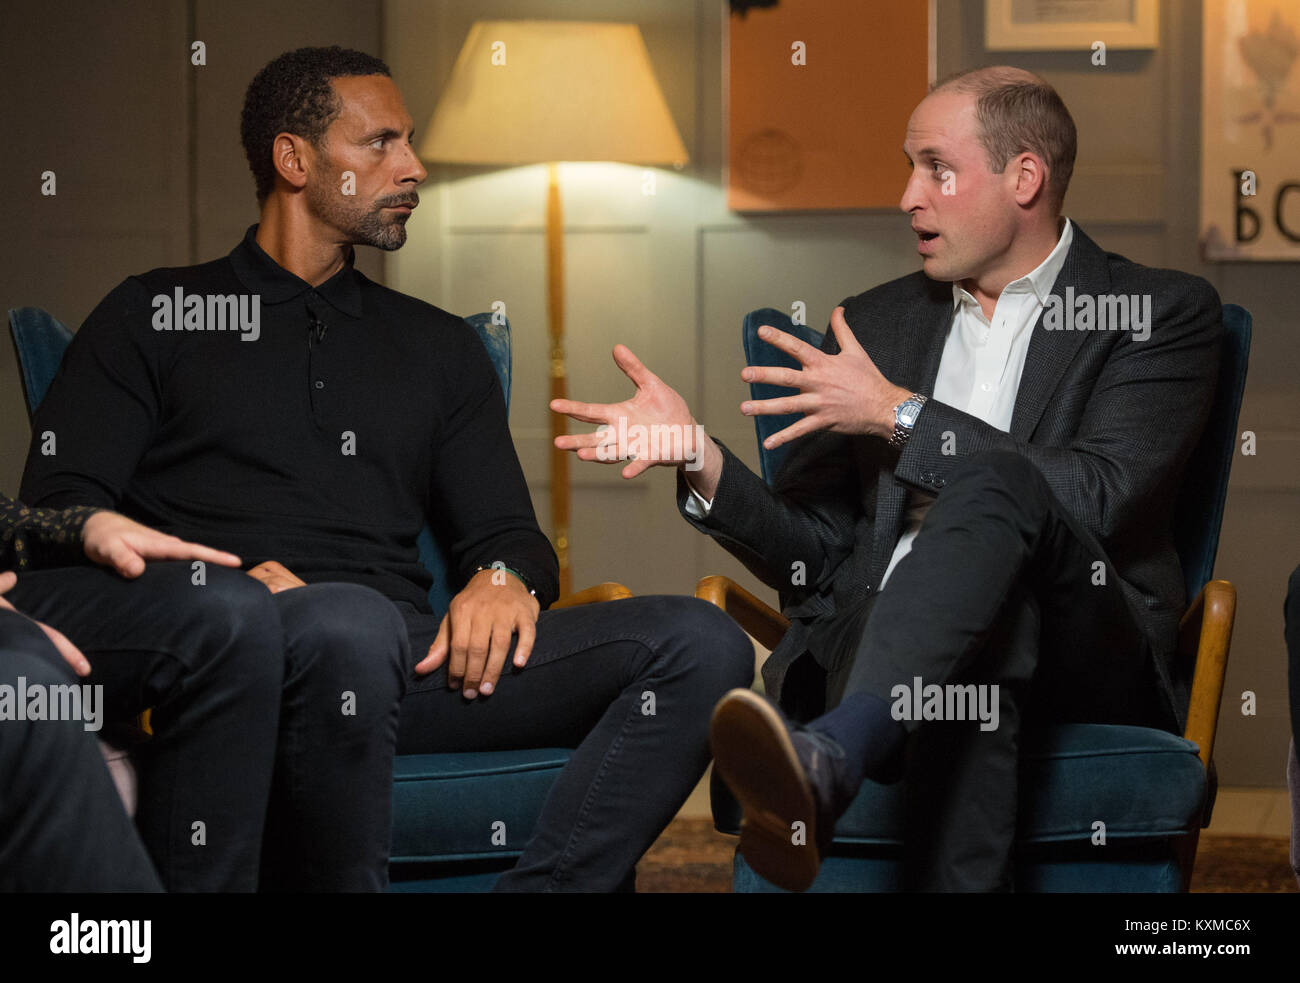 The Duke of Cambridge (right) with Rio Ferdinand during a visit to meet staff, volunteers, and supporters of 'Campaign Against Living Miserably' (CALM), a charity dedicated to preventing male suicide, to lend his support to their 'Best Man Project' at High Road House, in Chiswick London. Stock Photo